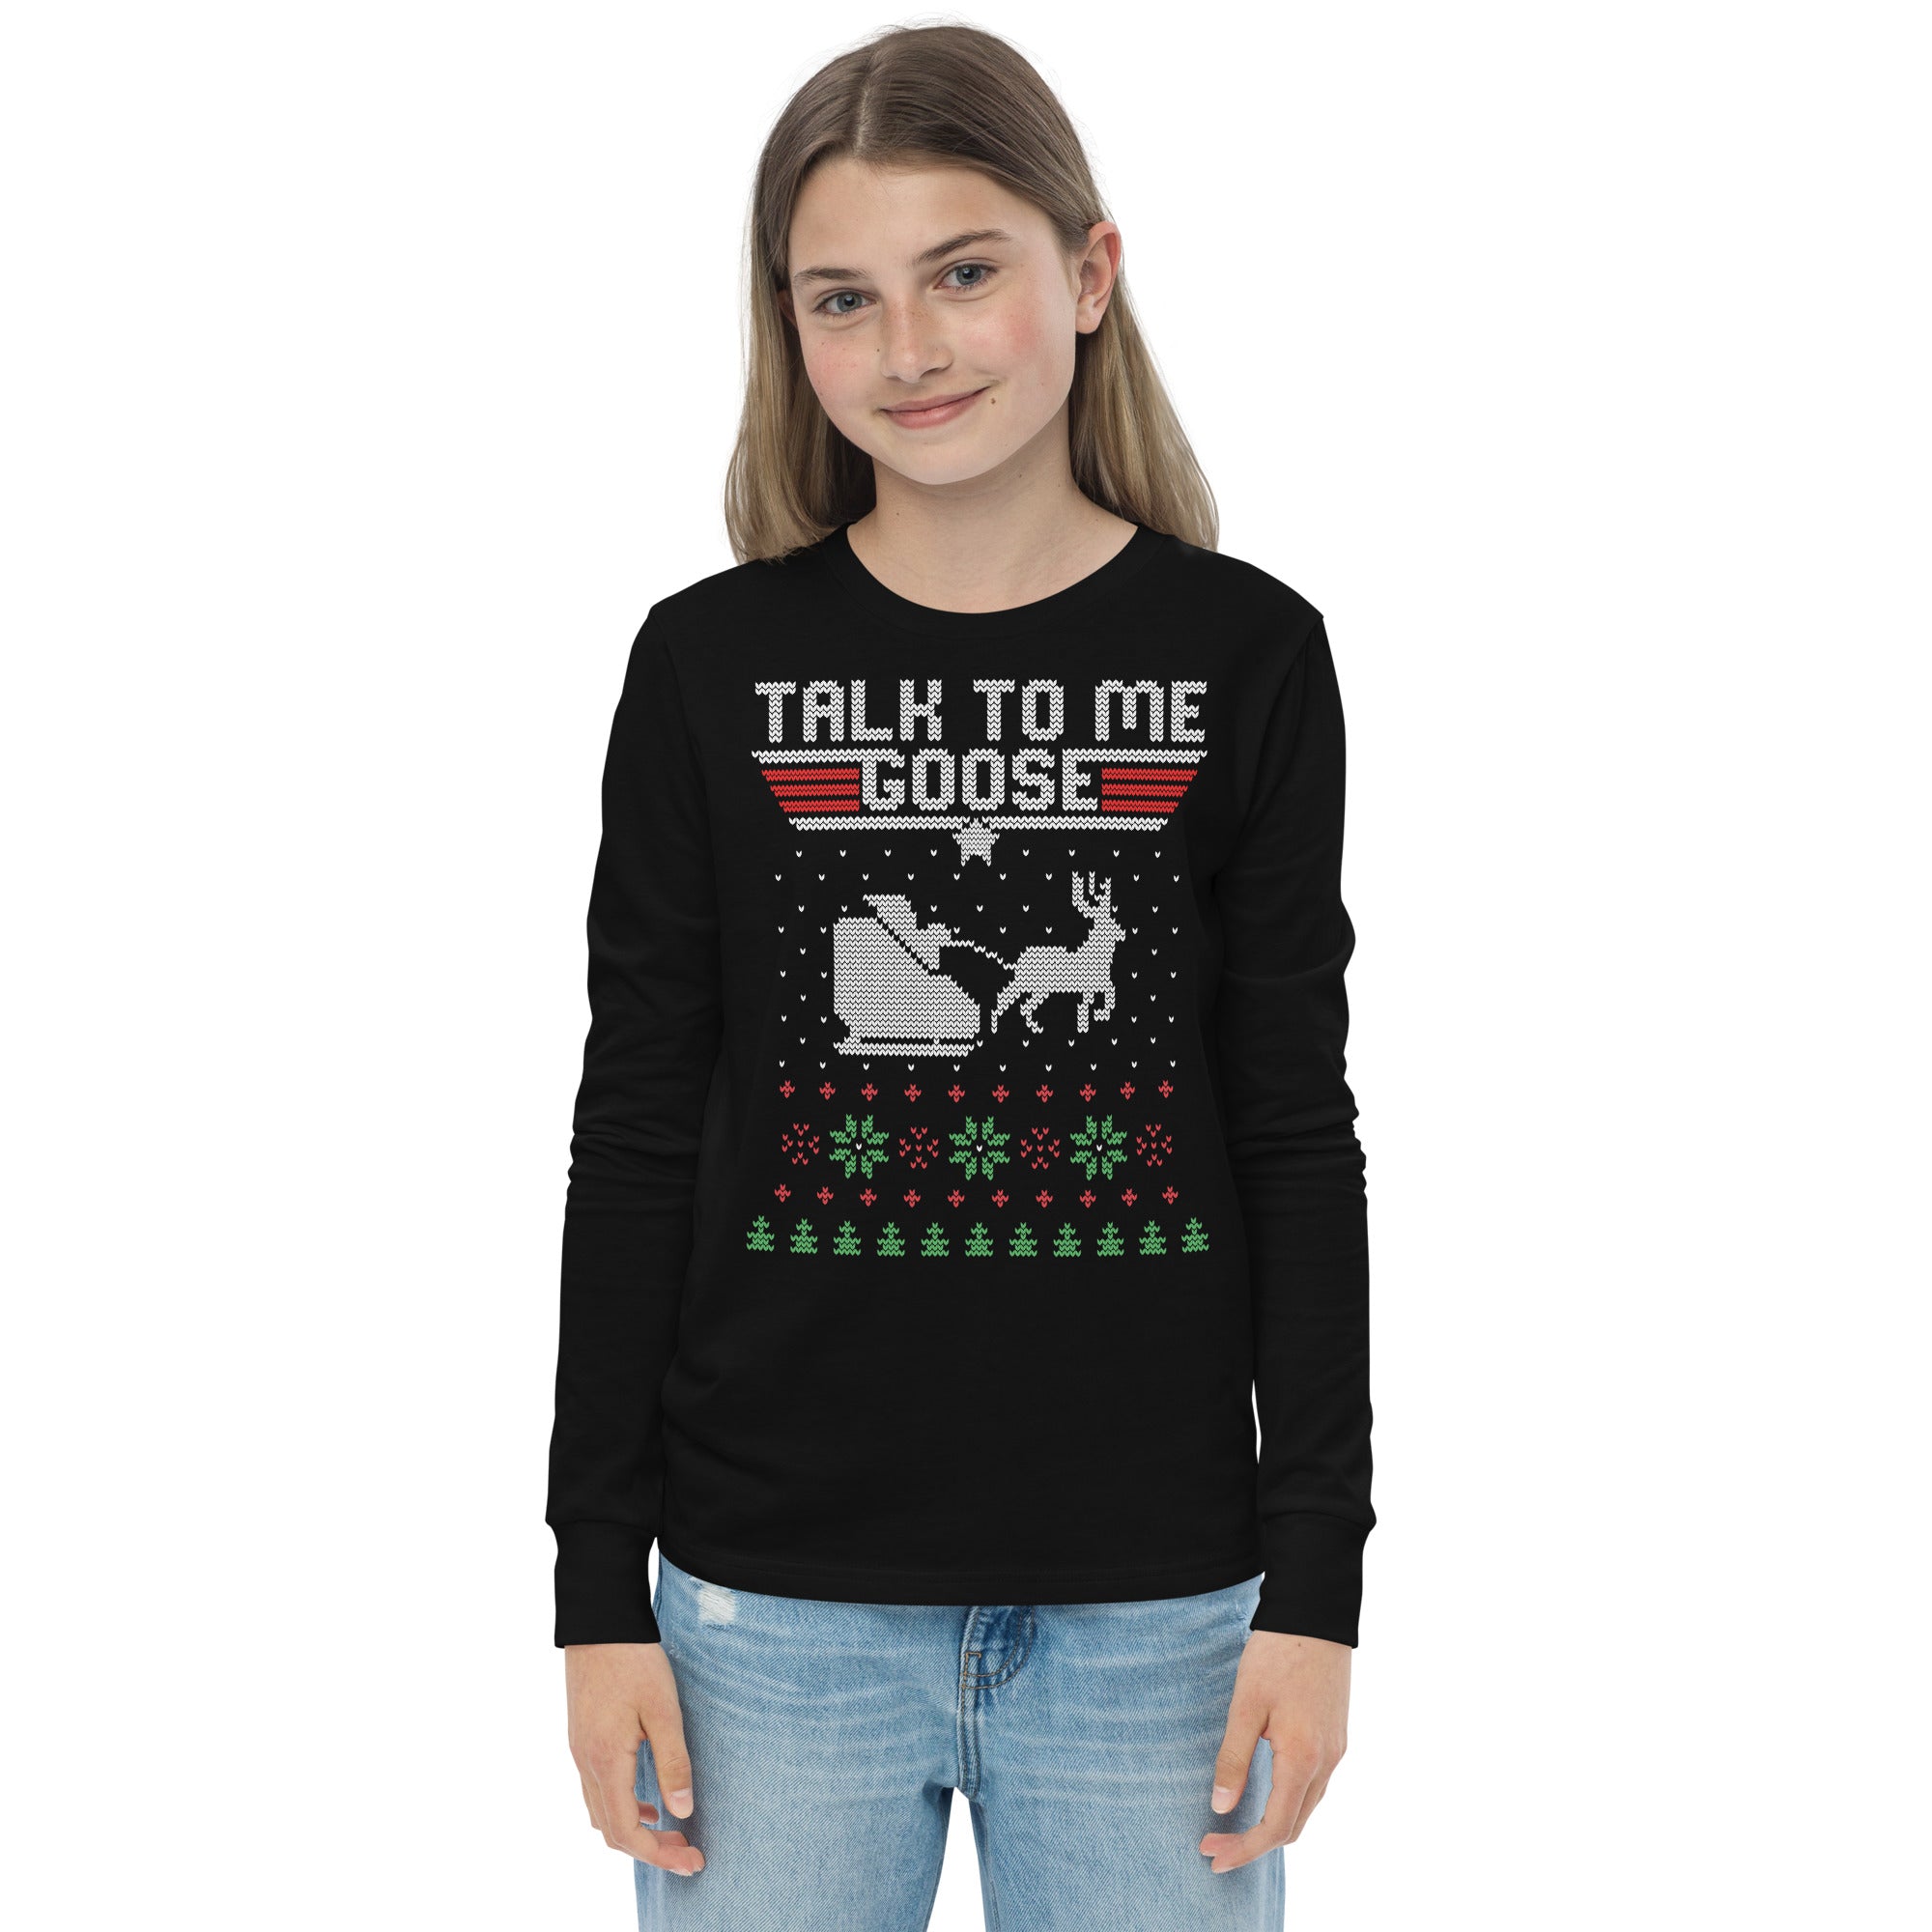 Talk To Me Goose Youth Ugly Christmas Long Sleeve Tee